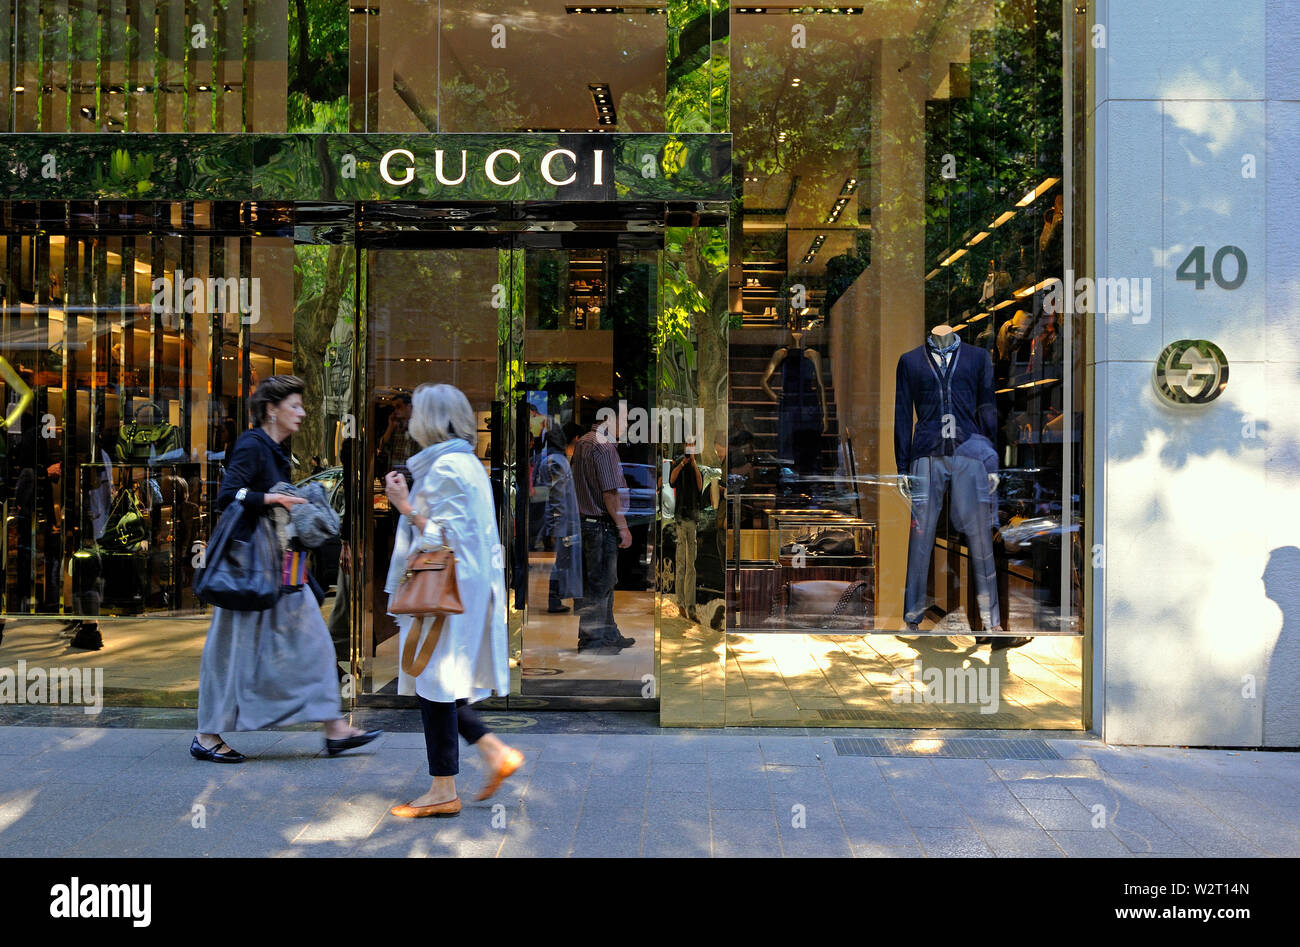 dusseldorf, germany - april 30, 2011: women passing by a gucci boutique on  konigsalle in dusseldorf d110038 (5227) - dusseldorf - 2011-04-30 sa Stock  Photo - Alamy